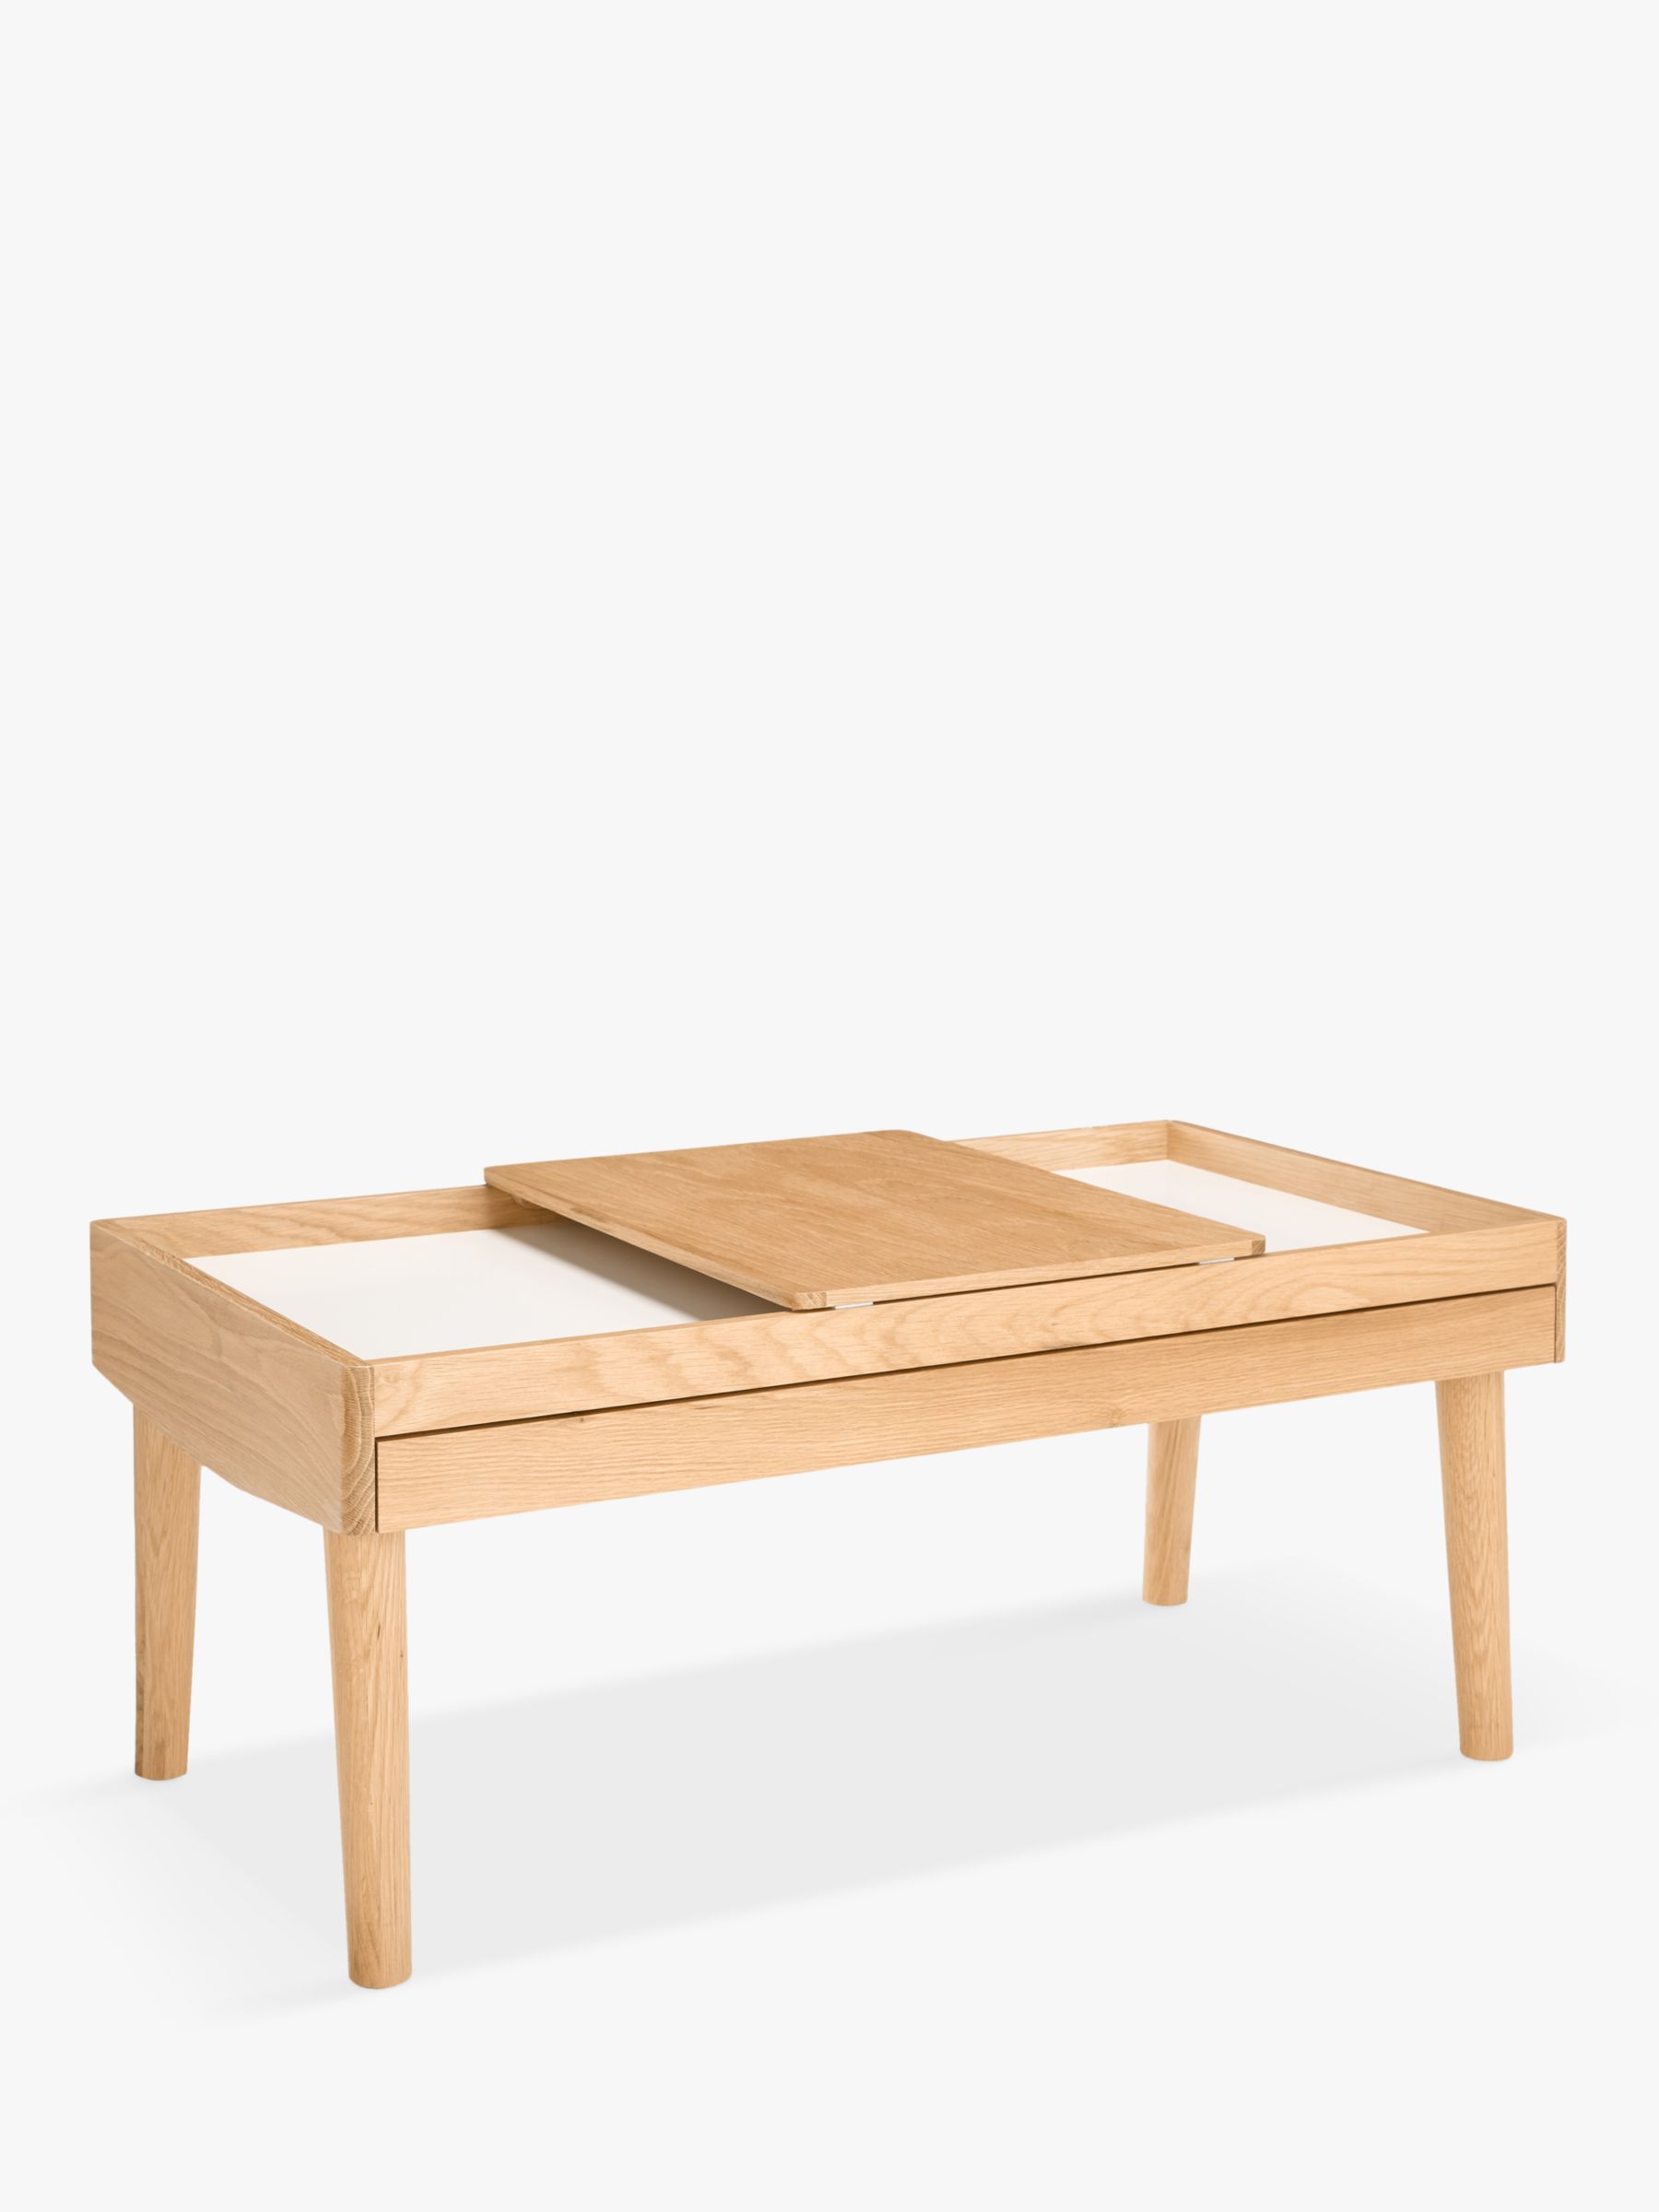 House by John LewisBow coffee table